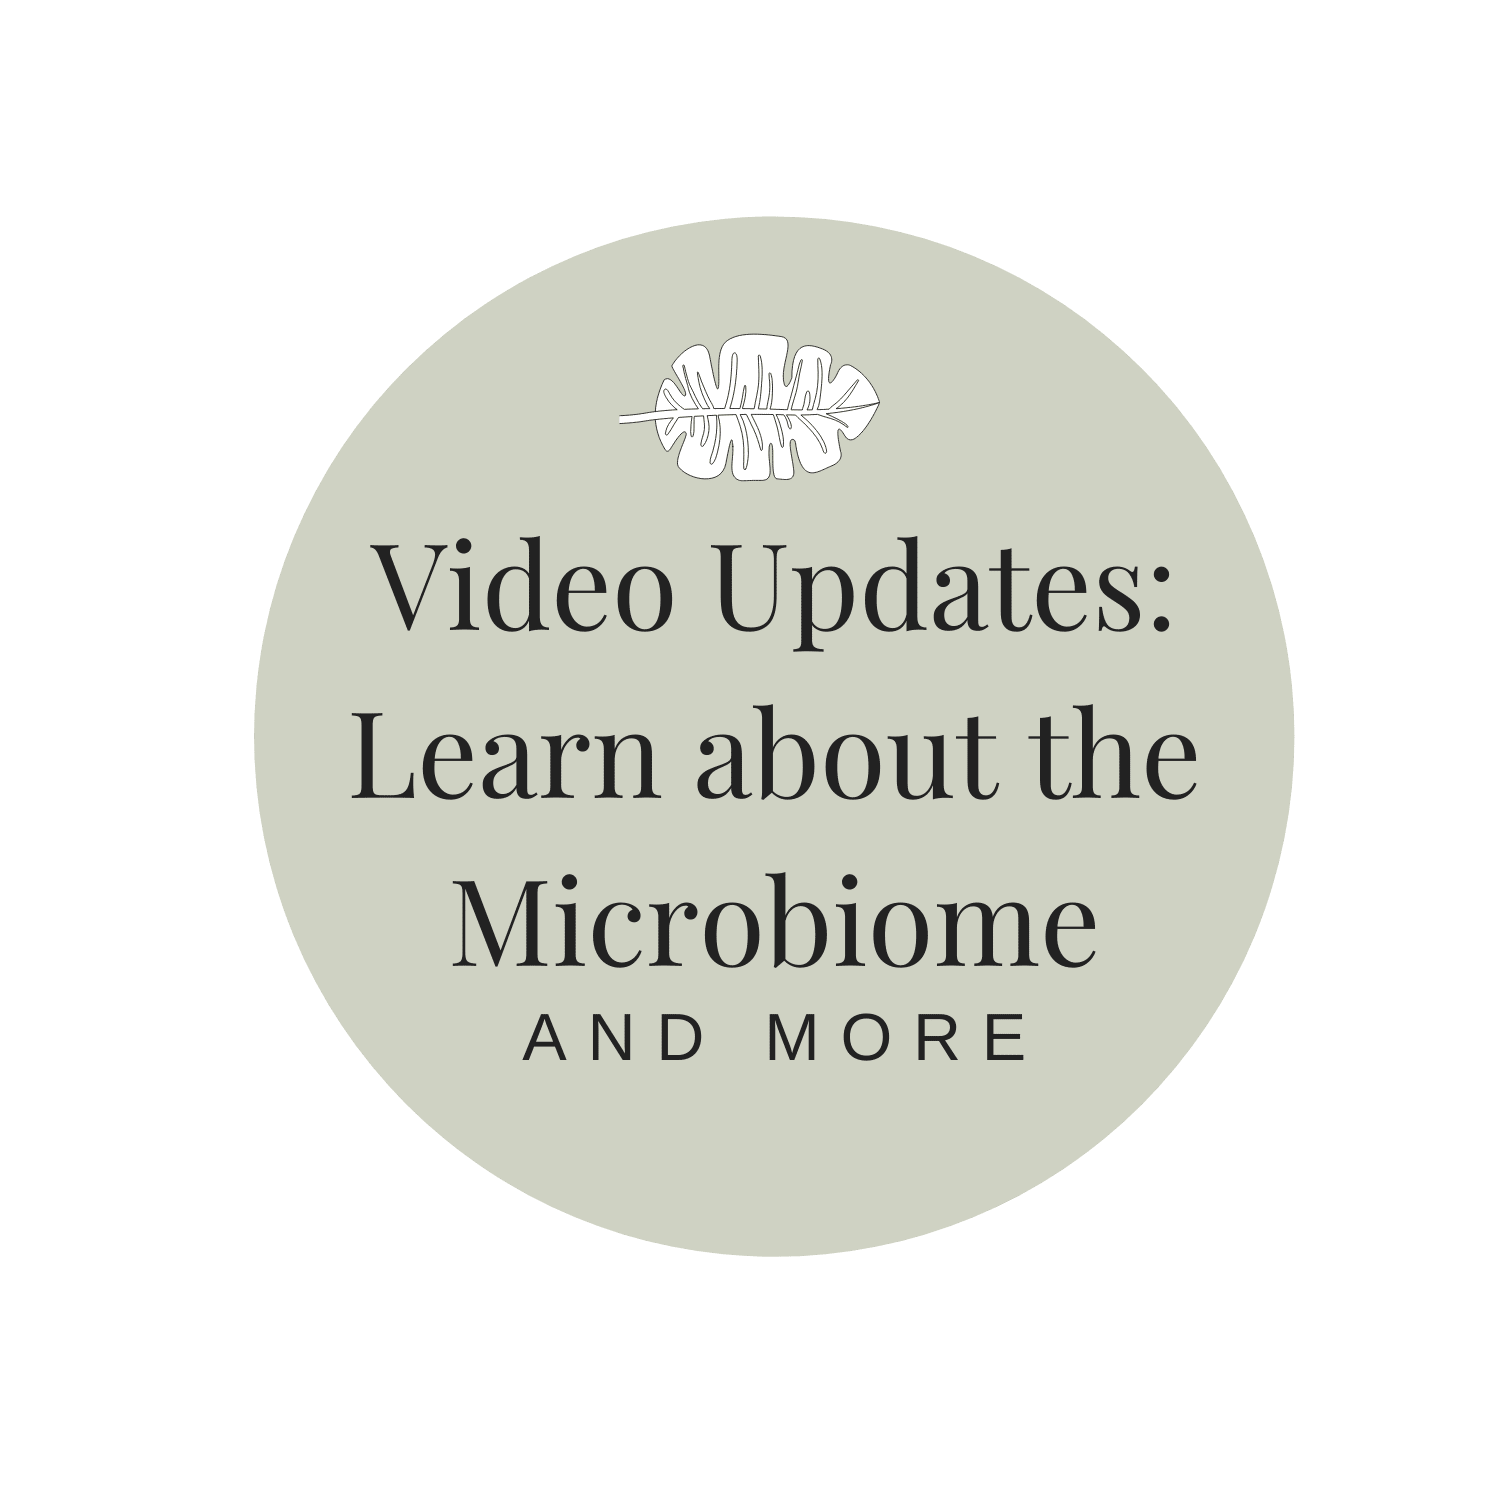 Microbiome and more